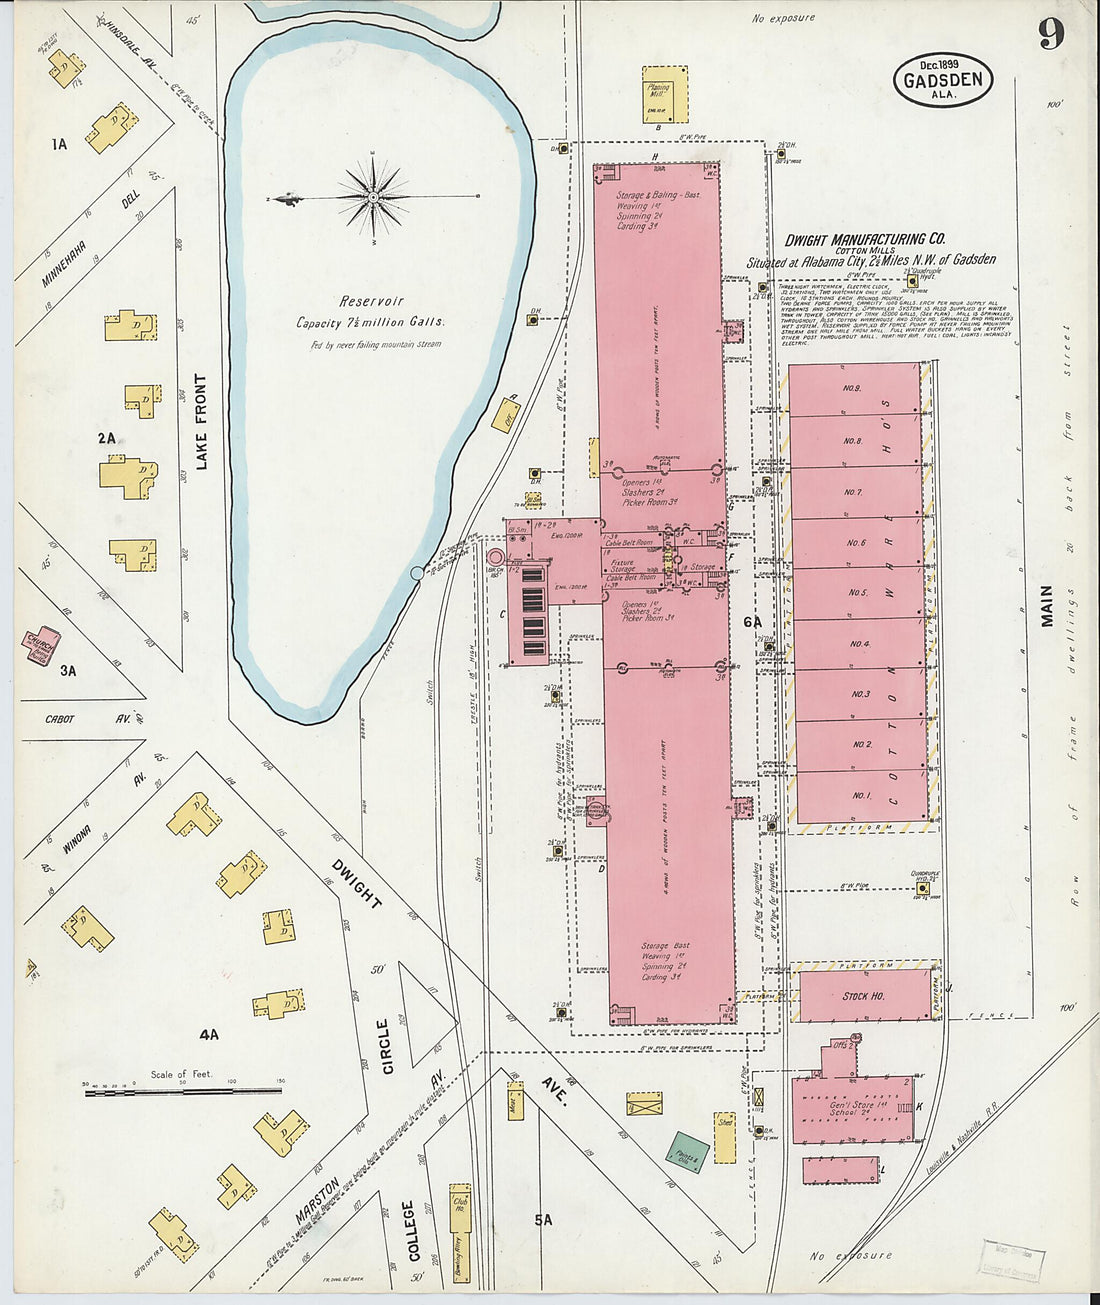 This old map of Gadsden, Etowah County, Alabama was created by Sanborn Map Company in 1899